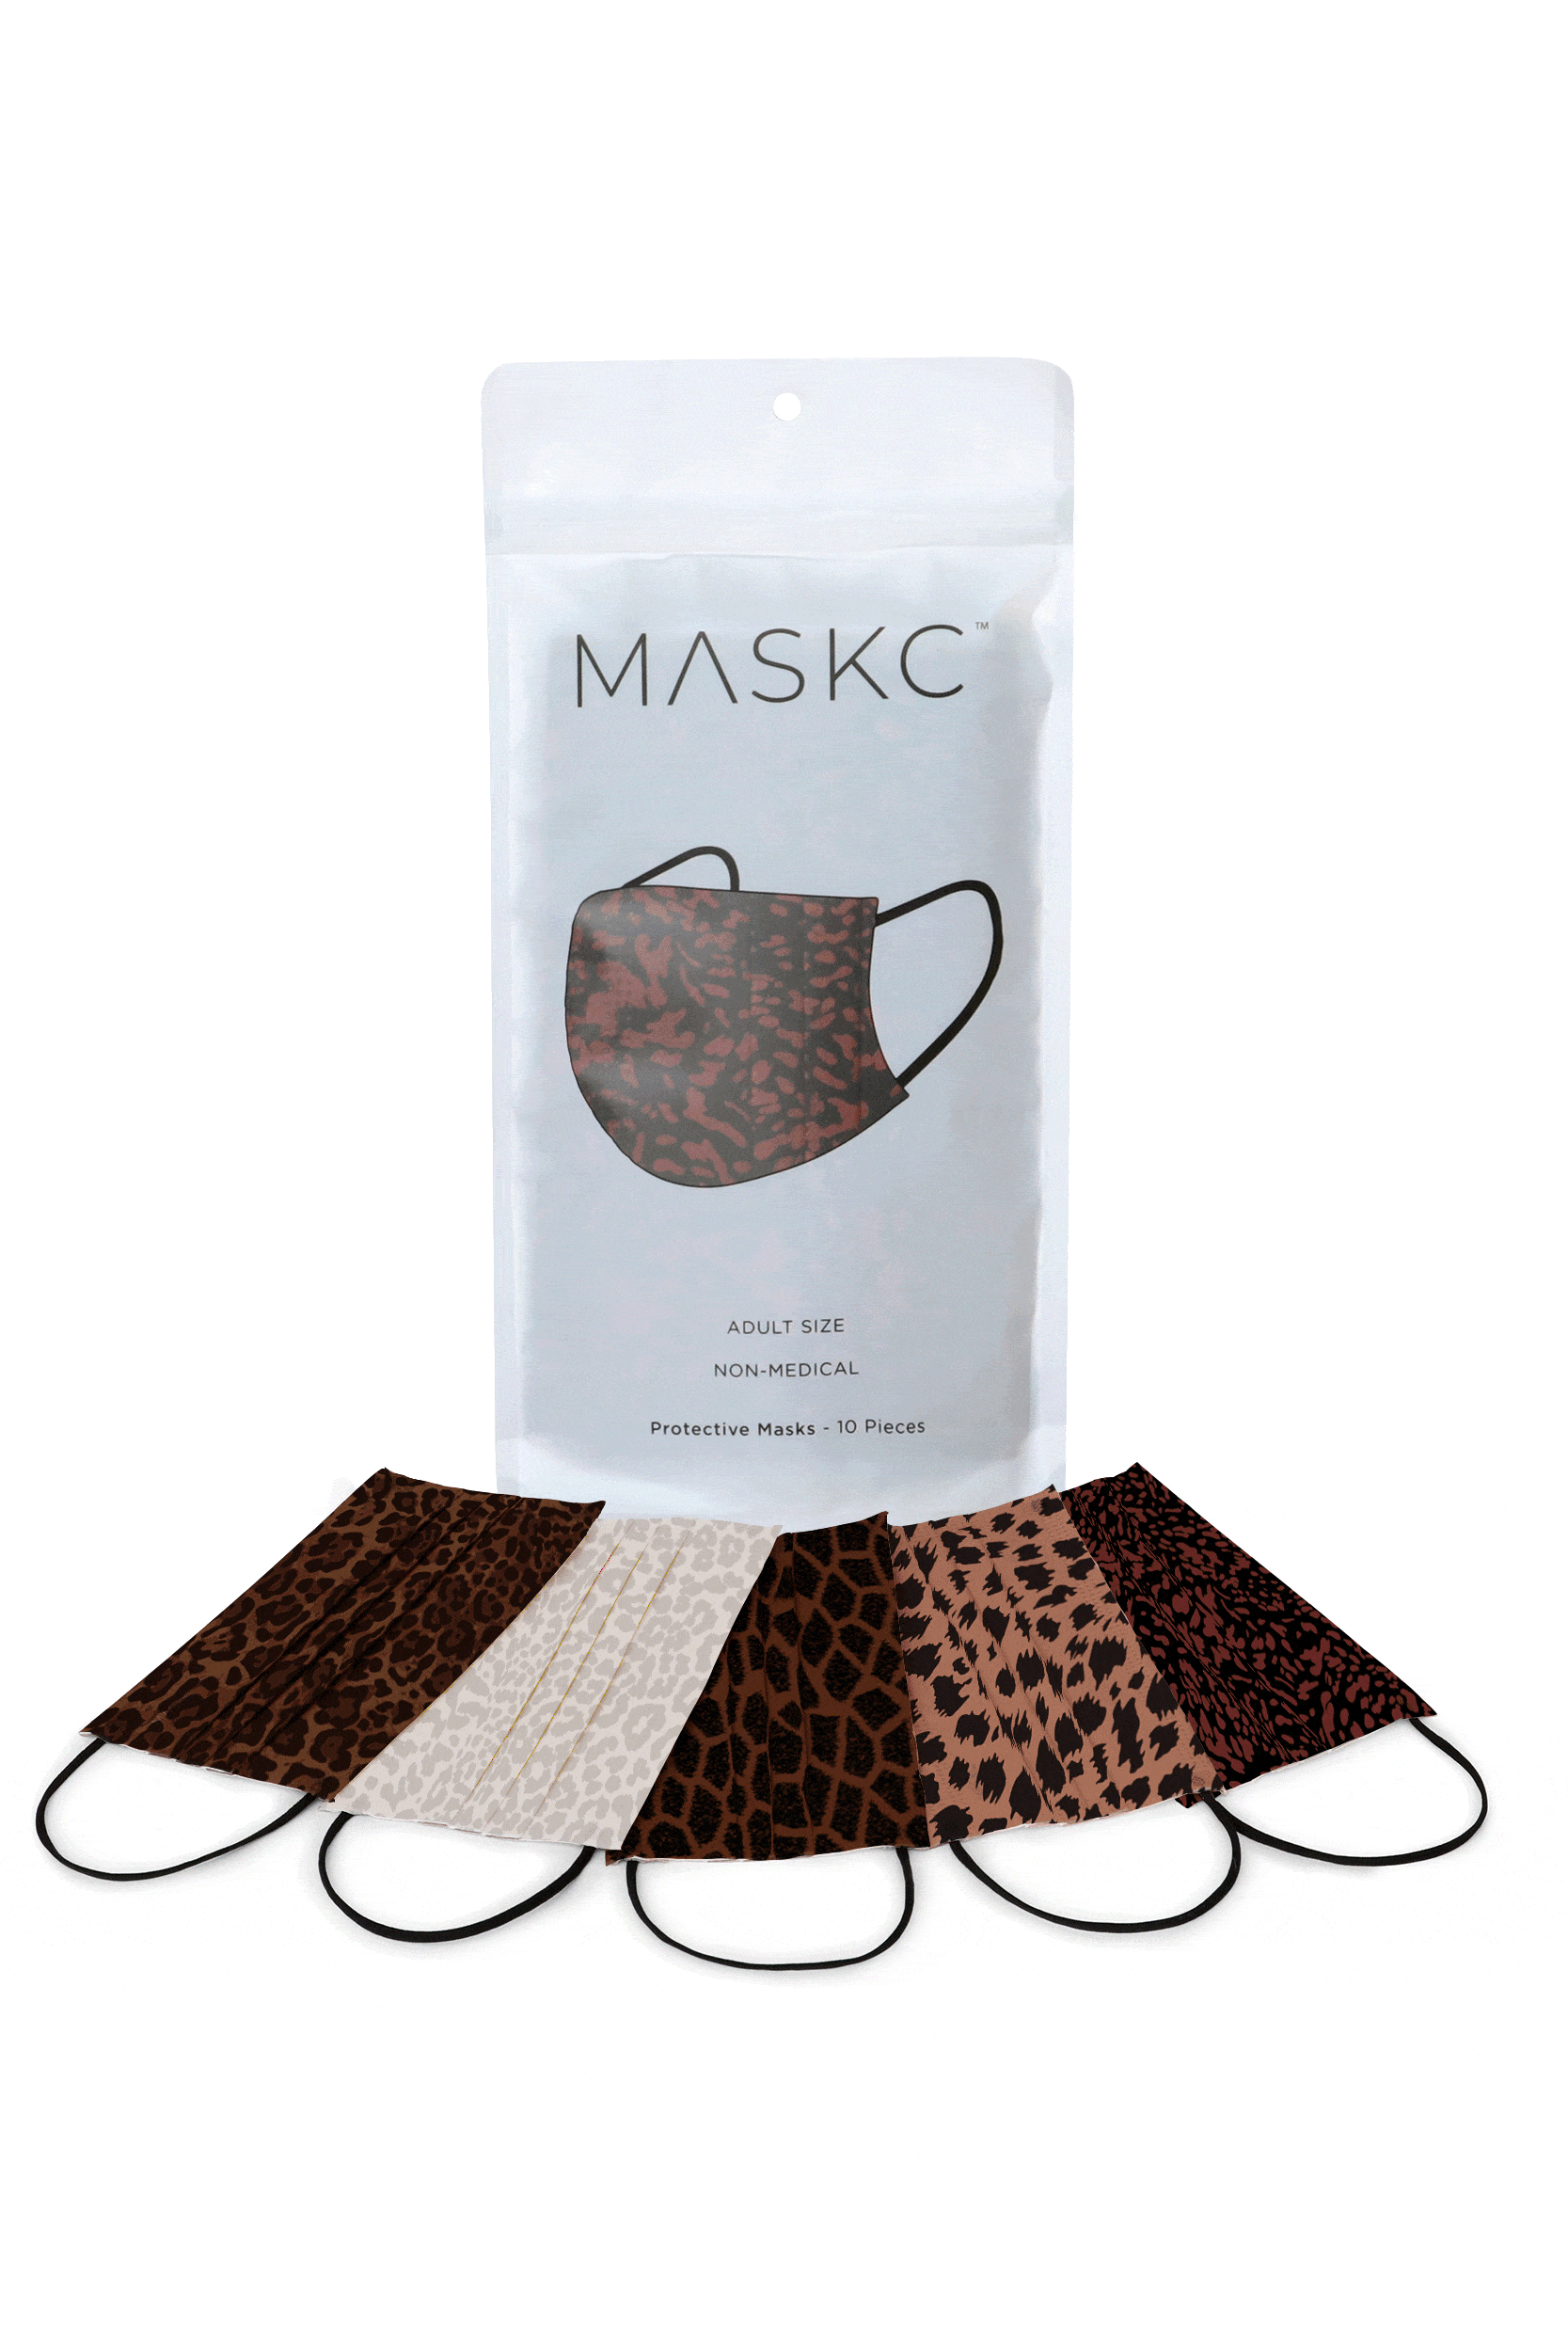 Pack of Animal Print Pleated face masks. Each pack contains stylish high quality face masks. 